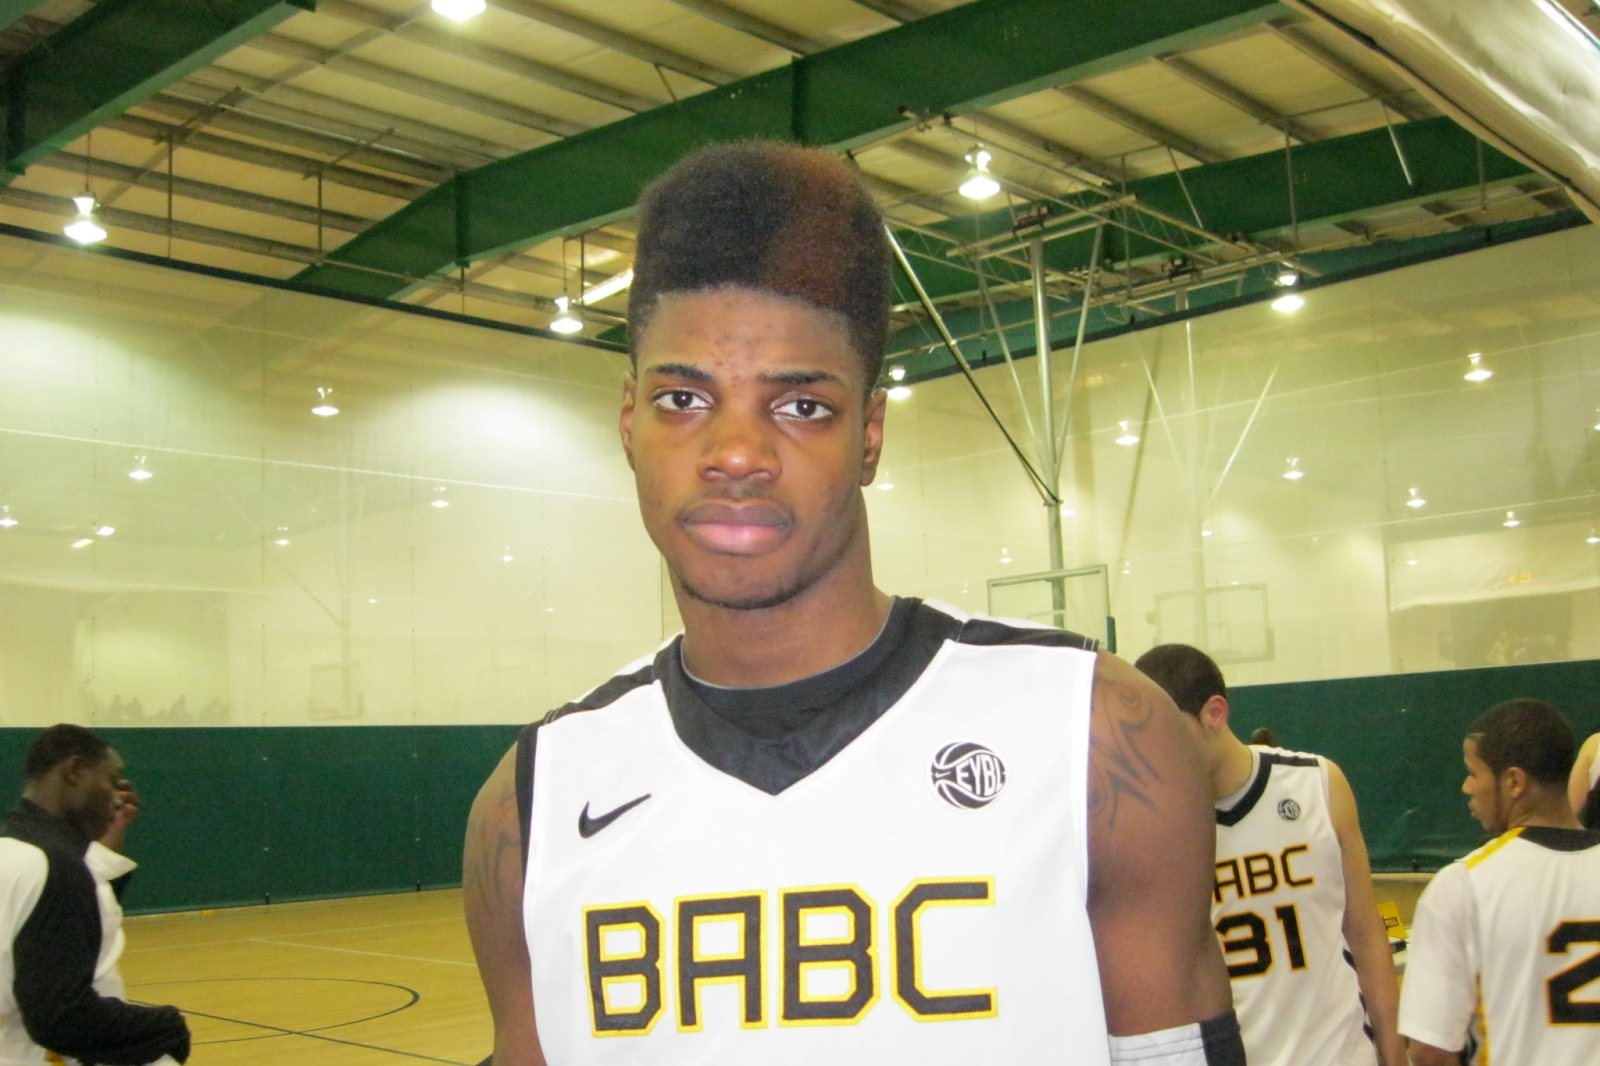 Nerlens Noel grew up in Everett, Massachusetts, and gained national attention for his shot-blocking prowess at the Tilton School in New Hampshire.